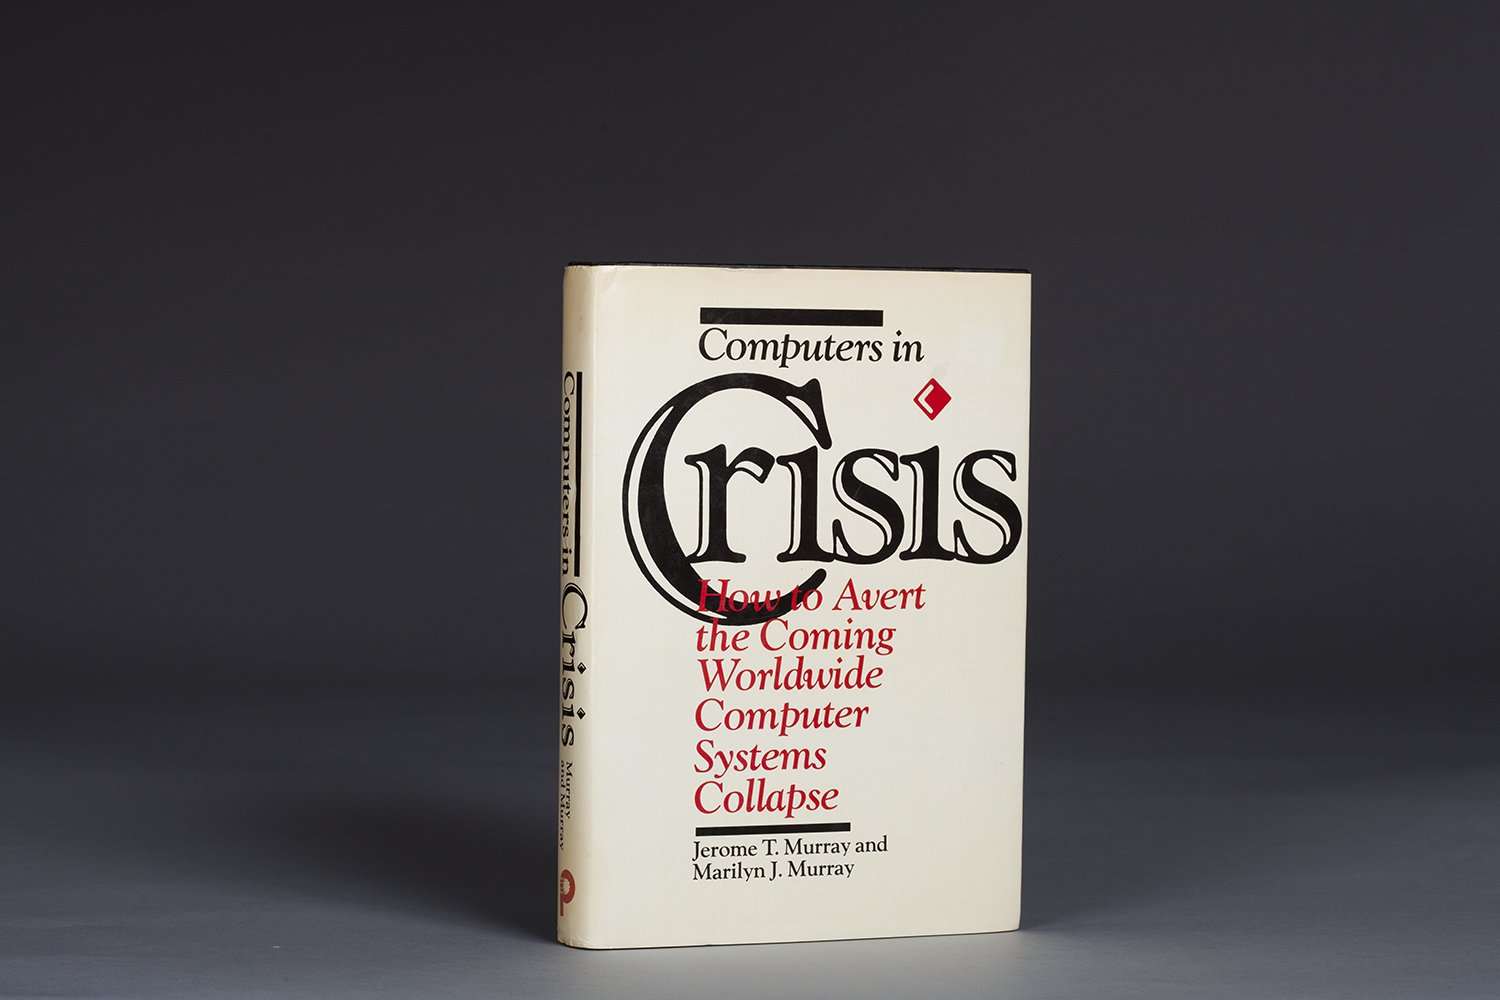 Computers in Crisis - 9866 Cover.jpg